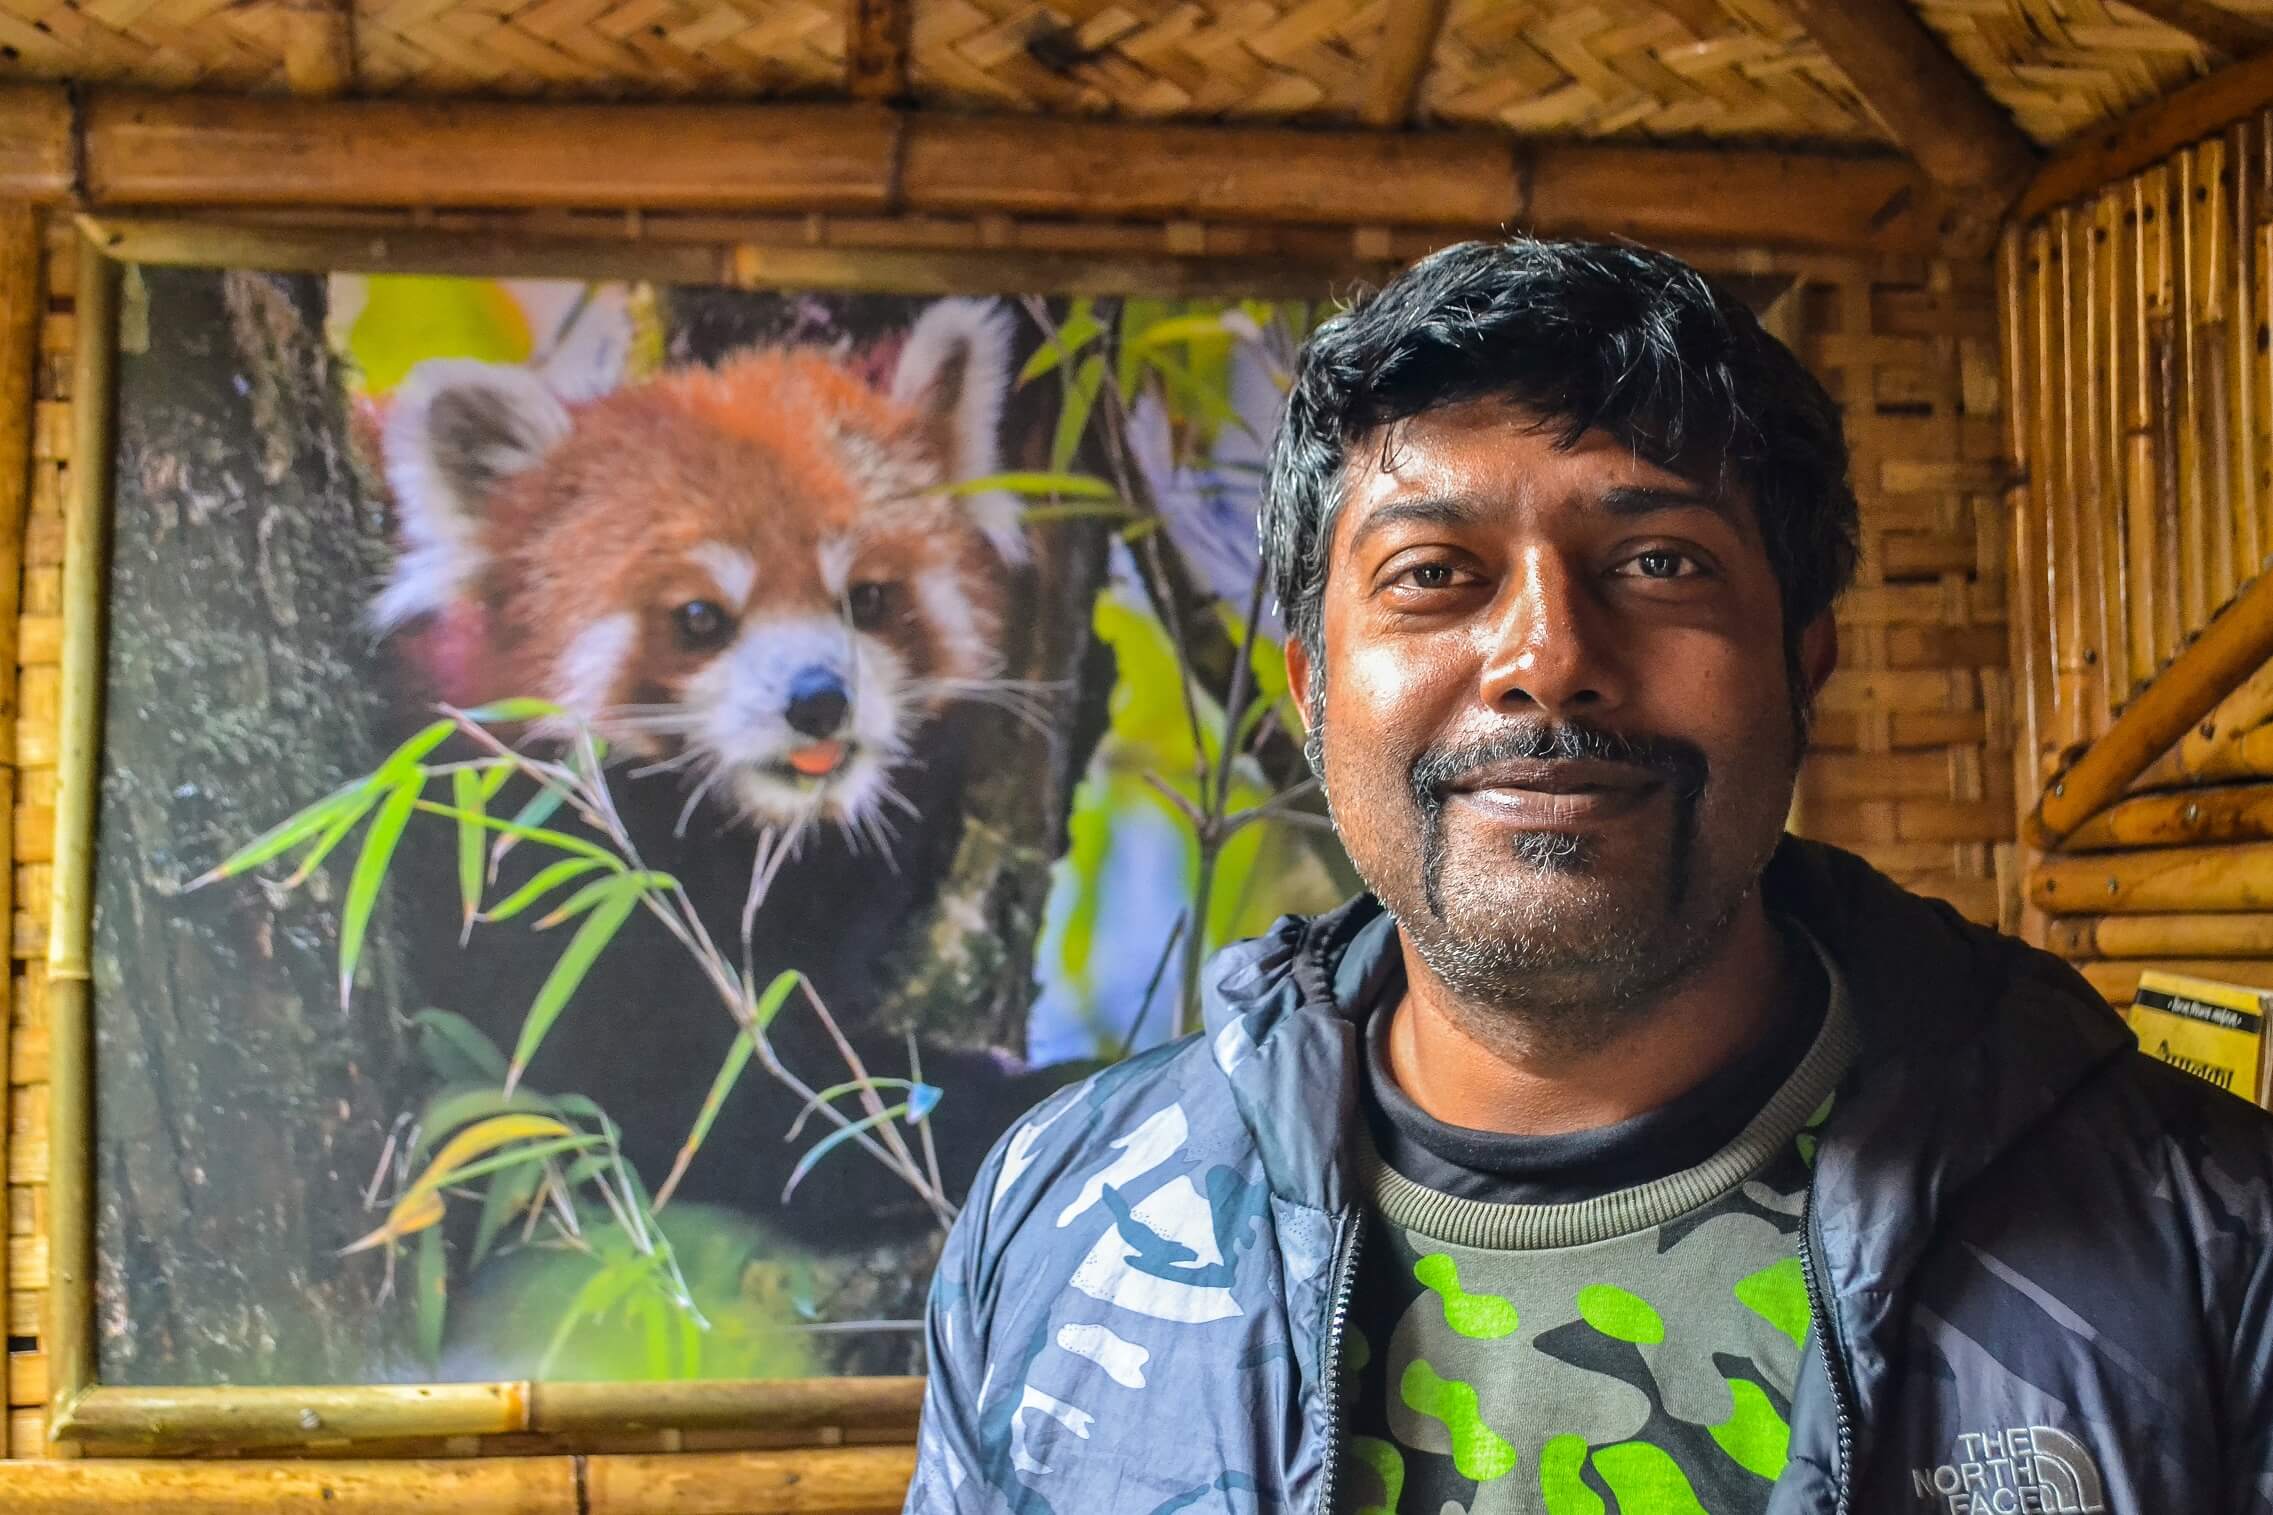 A man stands in the foreground with a photo of a red panda in the background